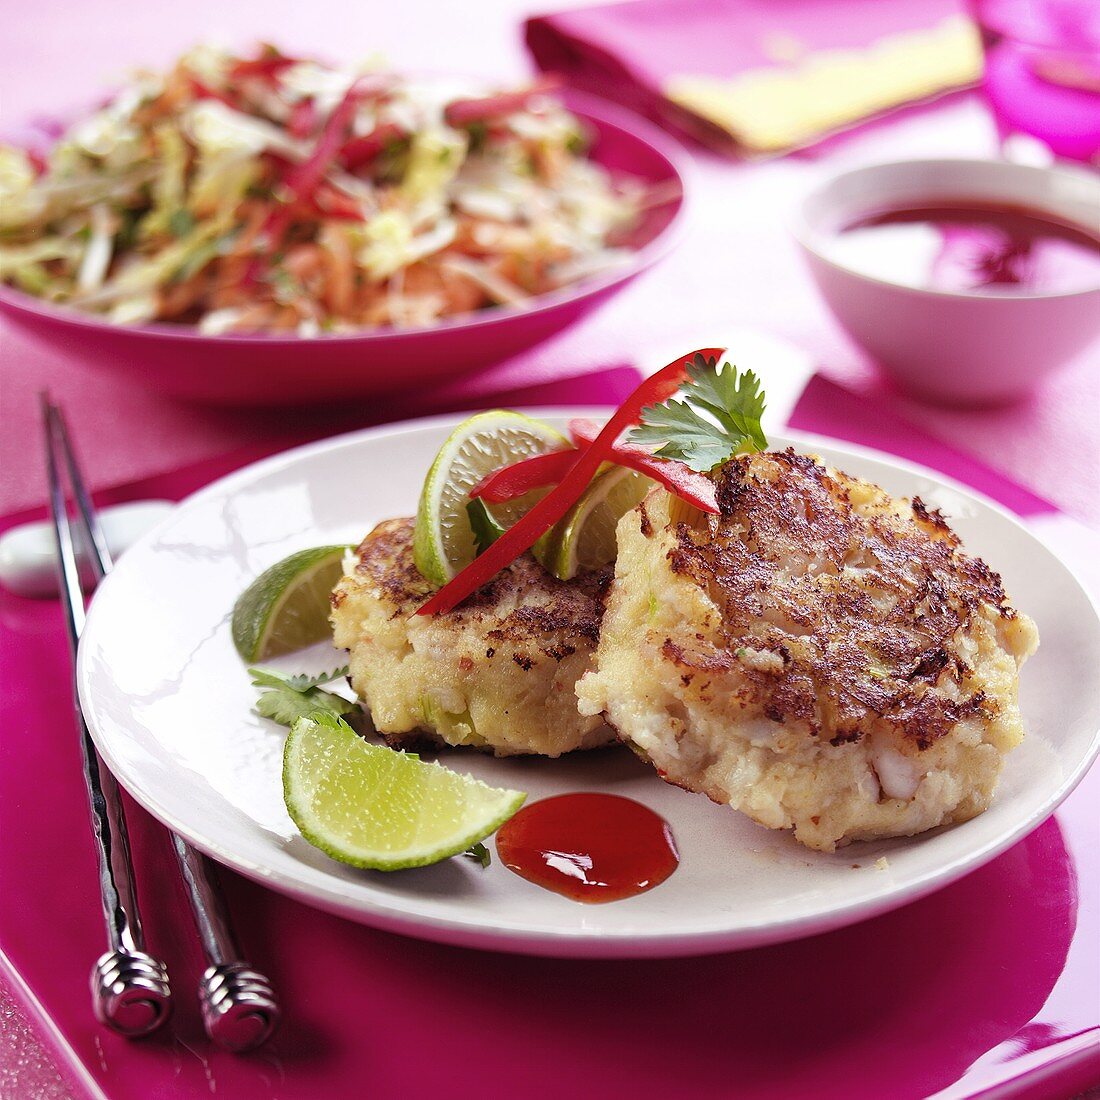 Fish cake with limes, chili and coriander